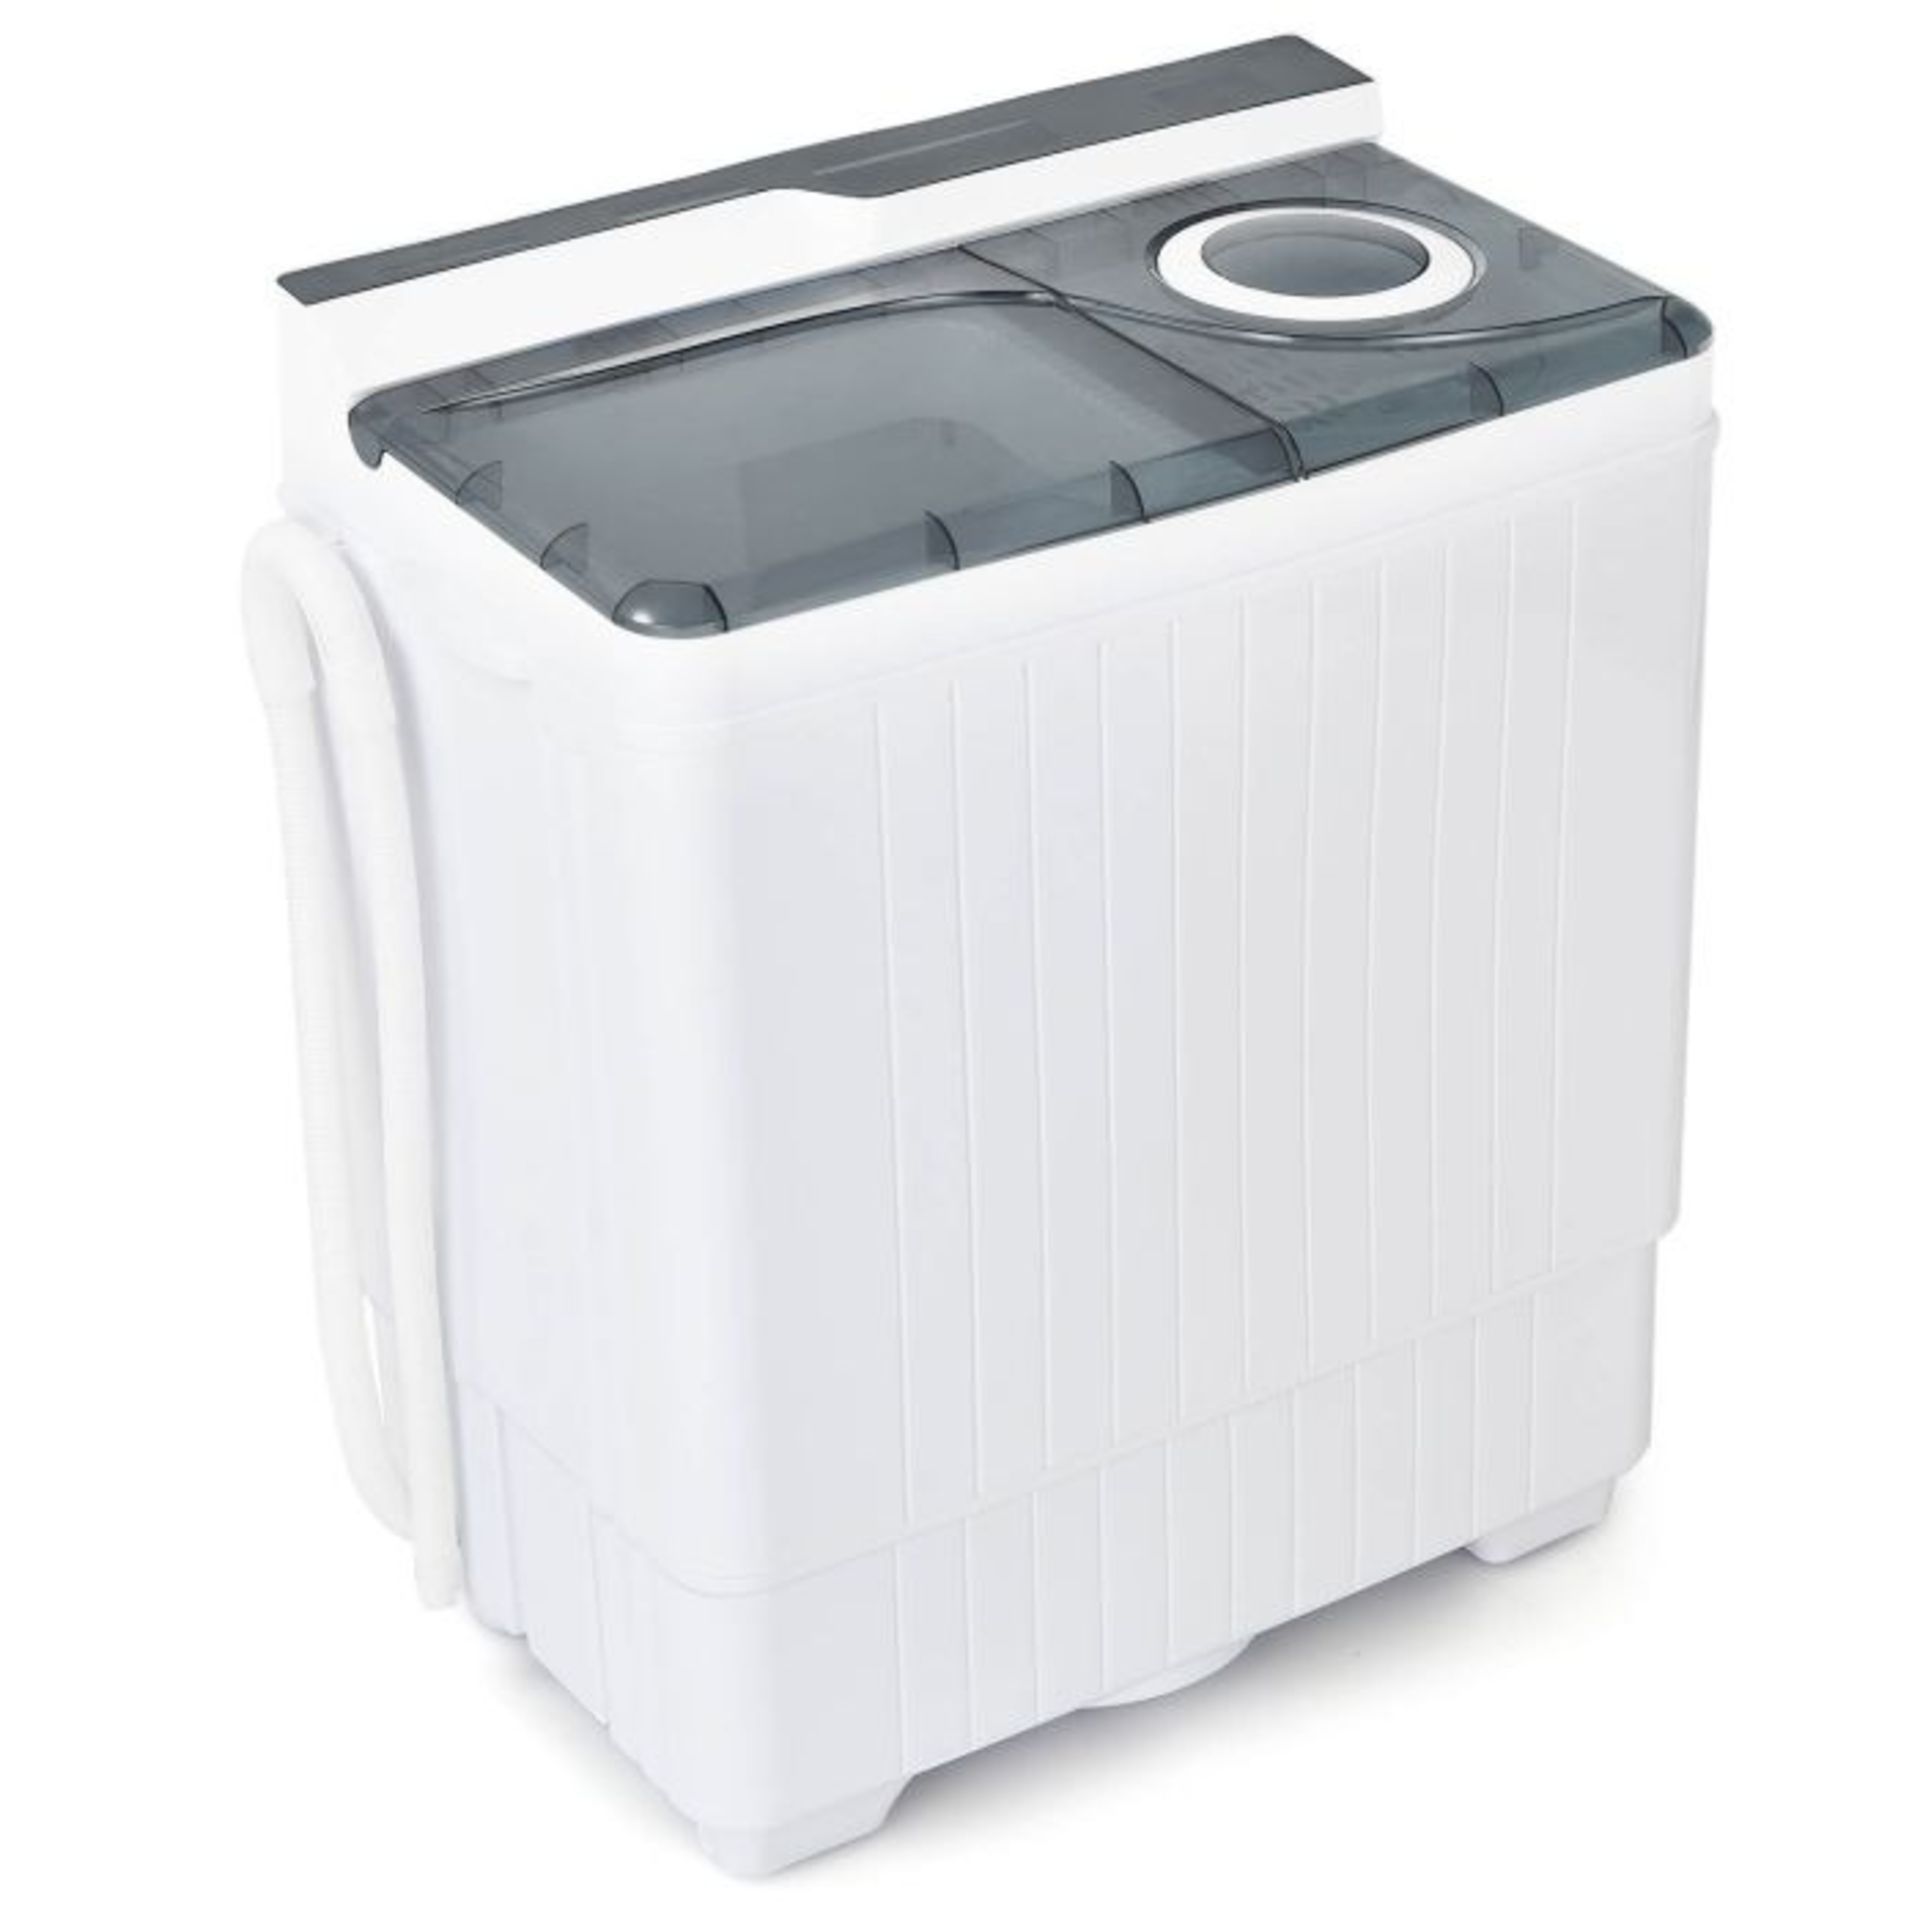 Portable Twin Tub Wash Machine with Spin Dryer-Grey - ER54